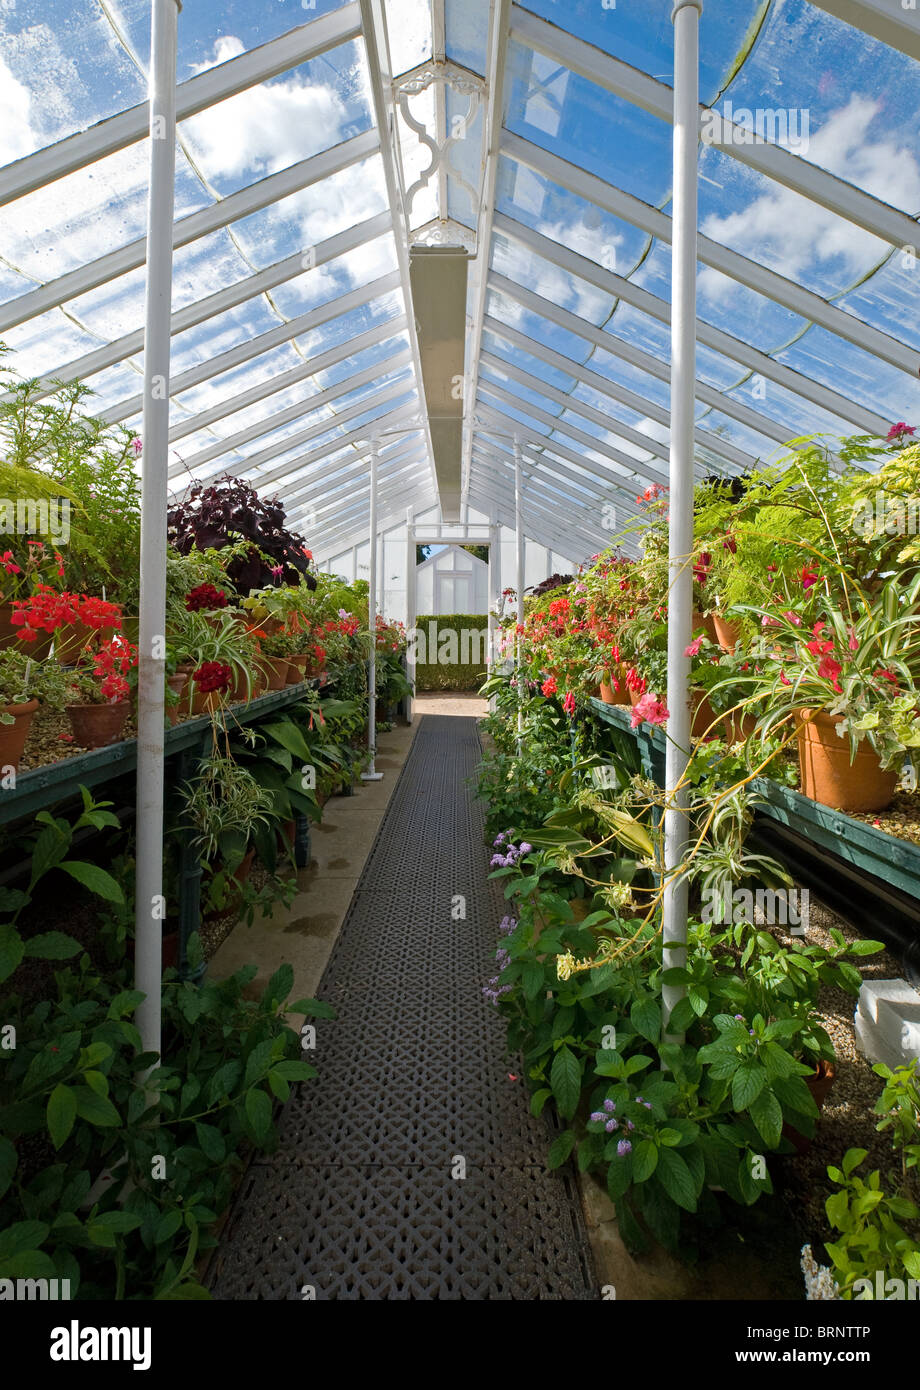 potted plants in greenhouse west dean garden Stock Photo